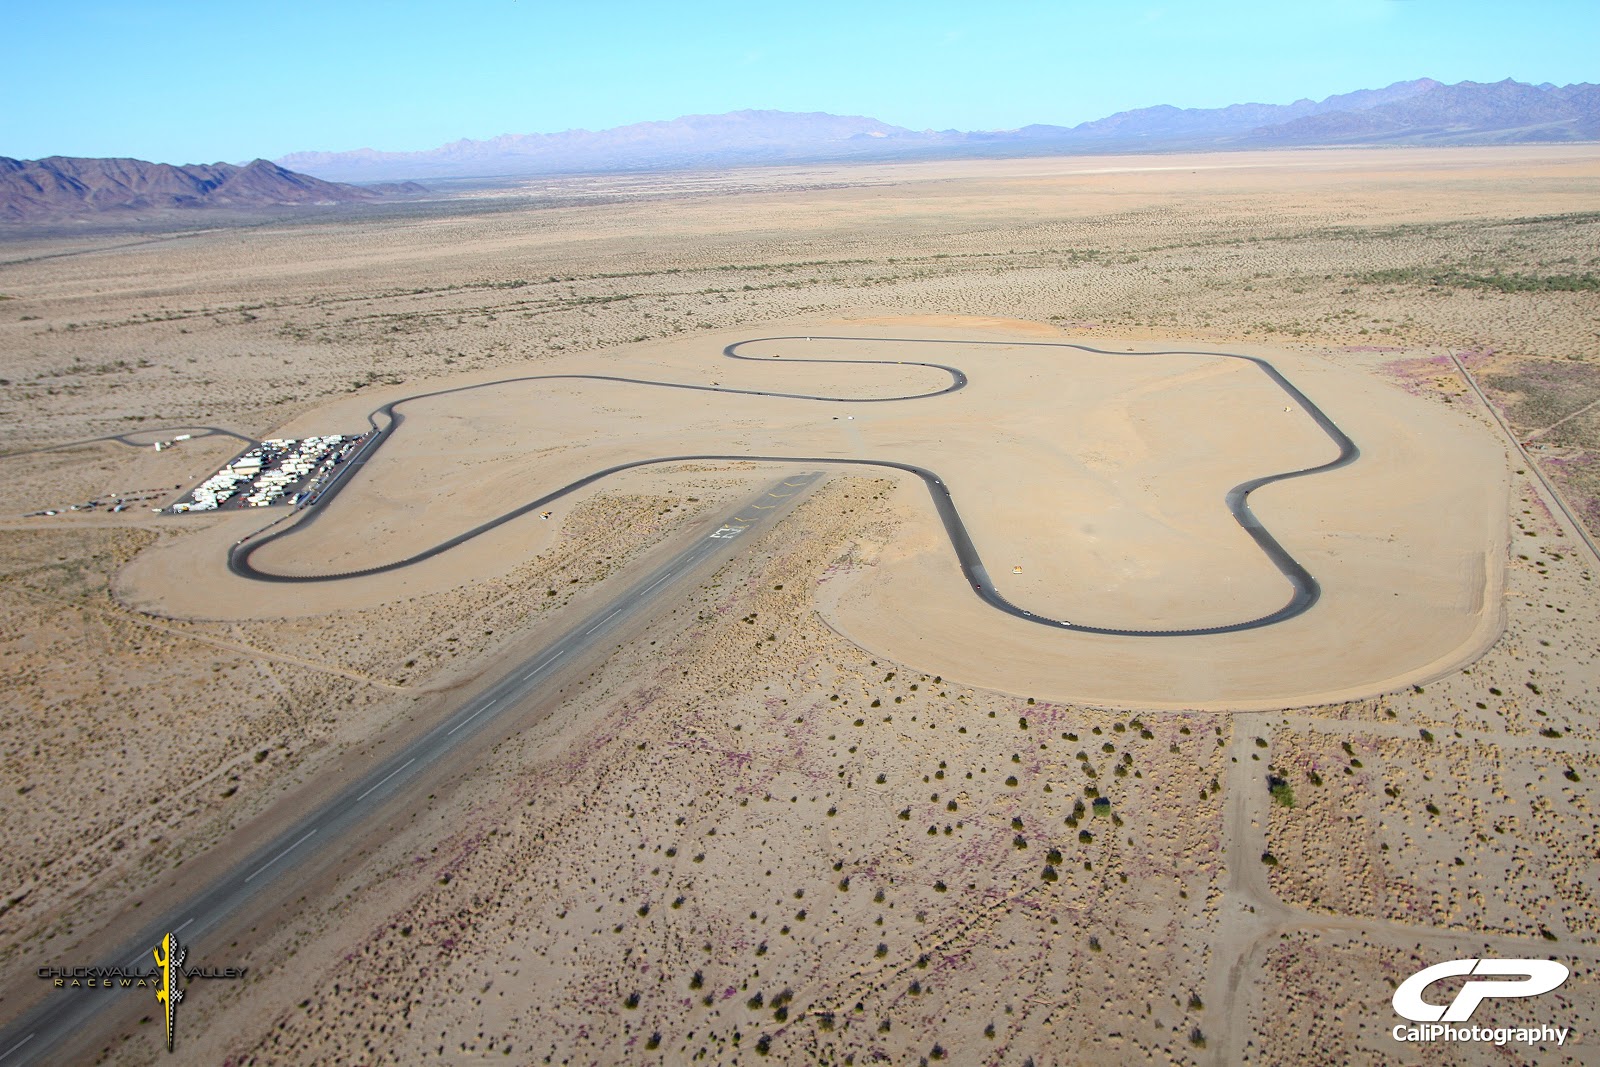 Learning a New Race Track #4: The Race Weekend